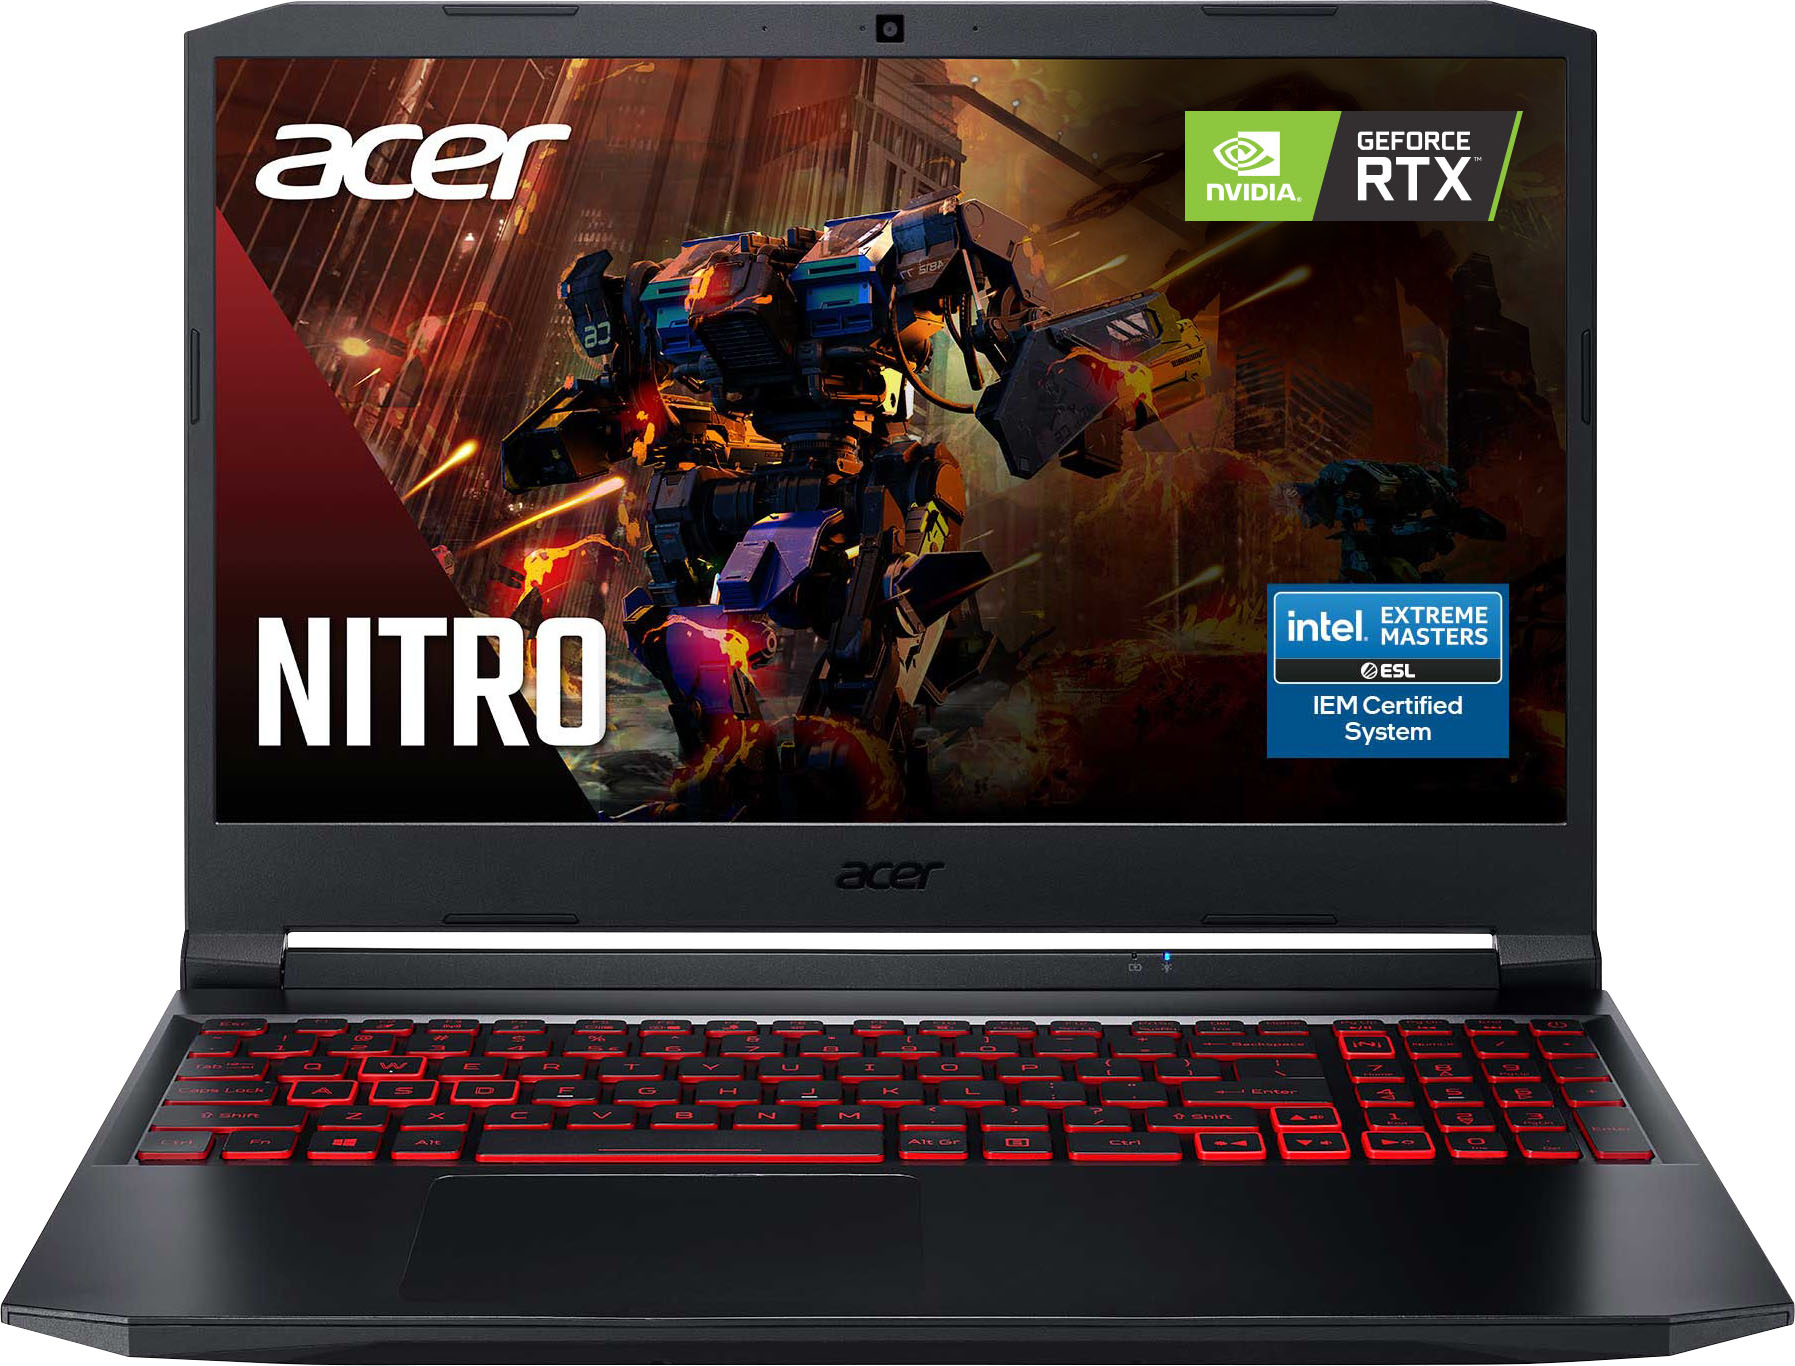 Questions and Answers: Acer Nitro 5 – Gaming Laptop 15.6" FHD 144Hz